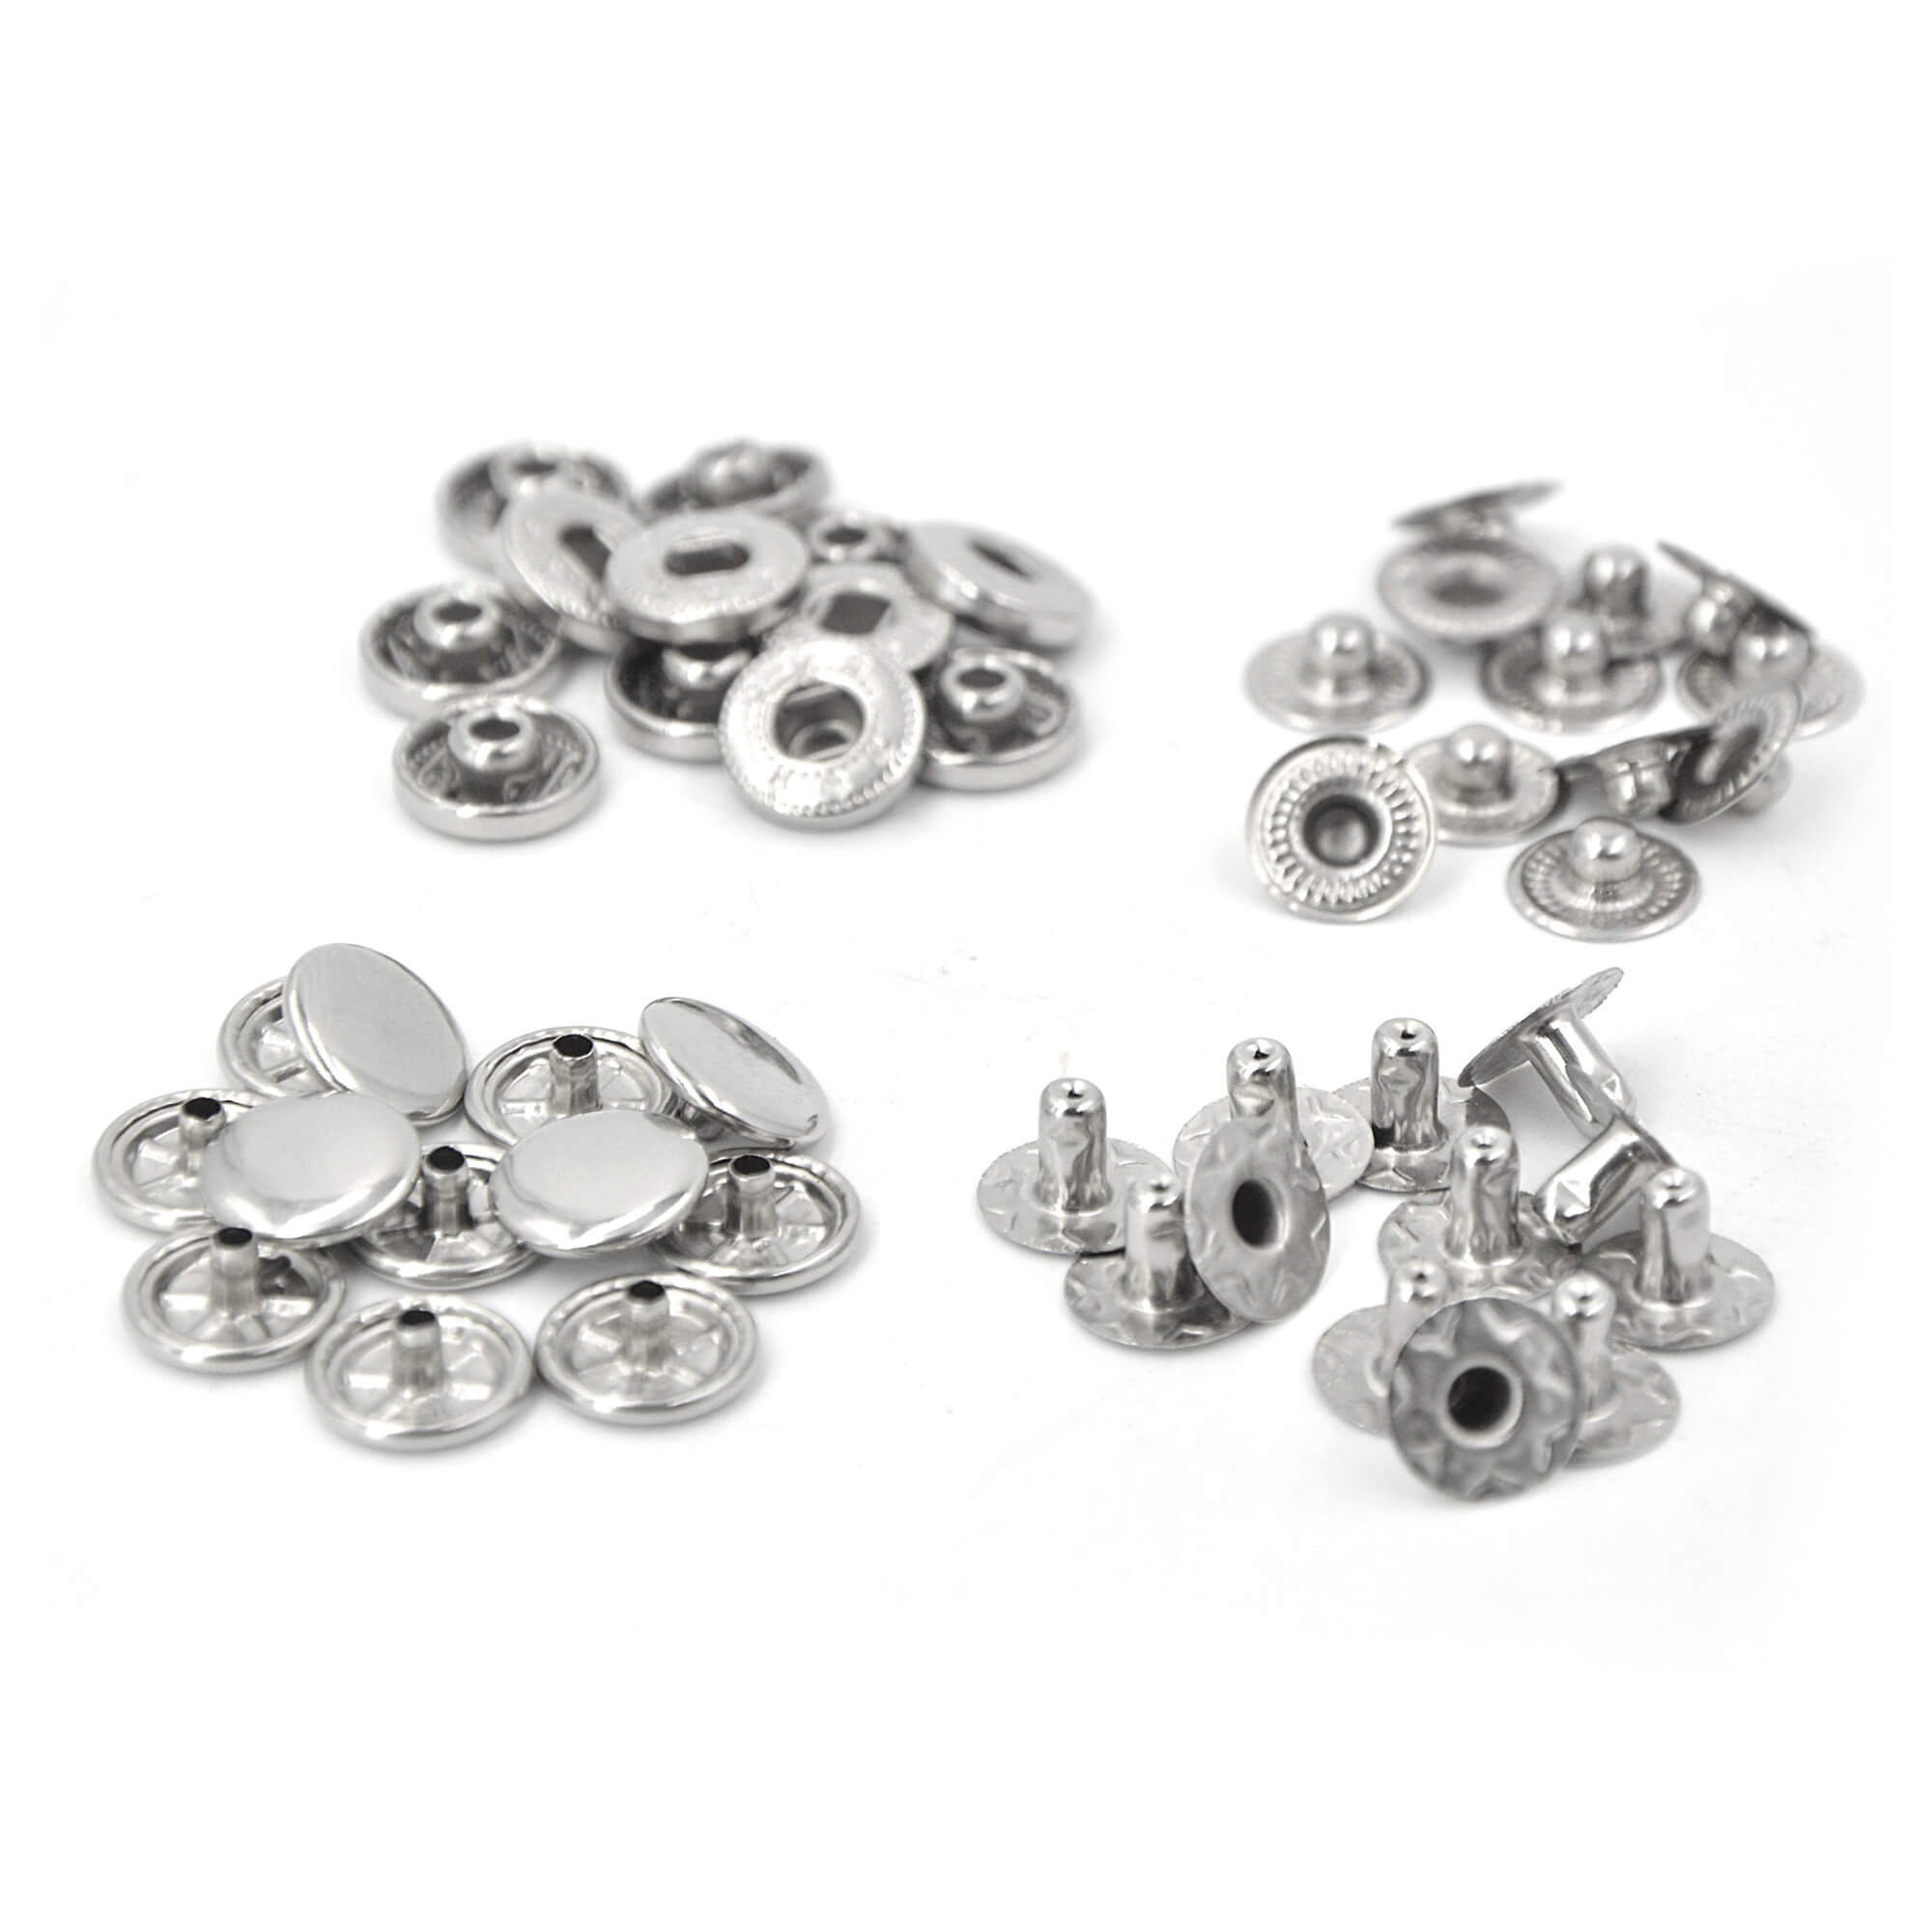 Unique Bargains 50 Sets Stainless Screw Snap Kit 10mm Copper Snaps Button with Tool, Silver Tone - Silver Tone